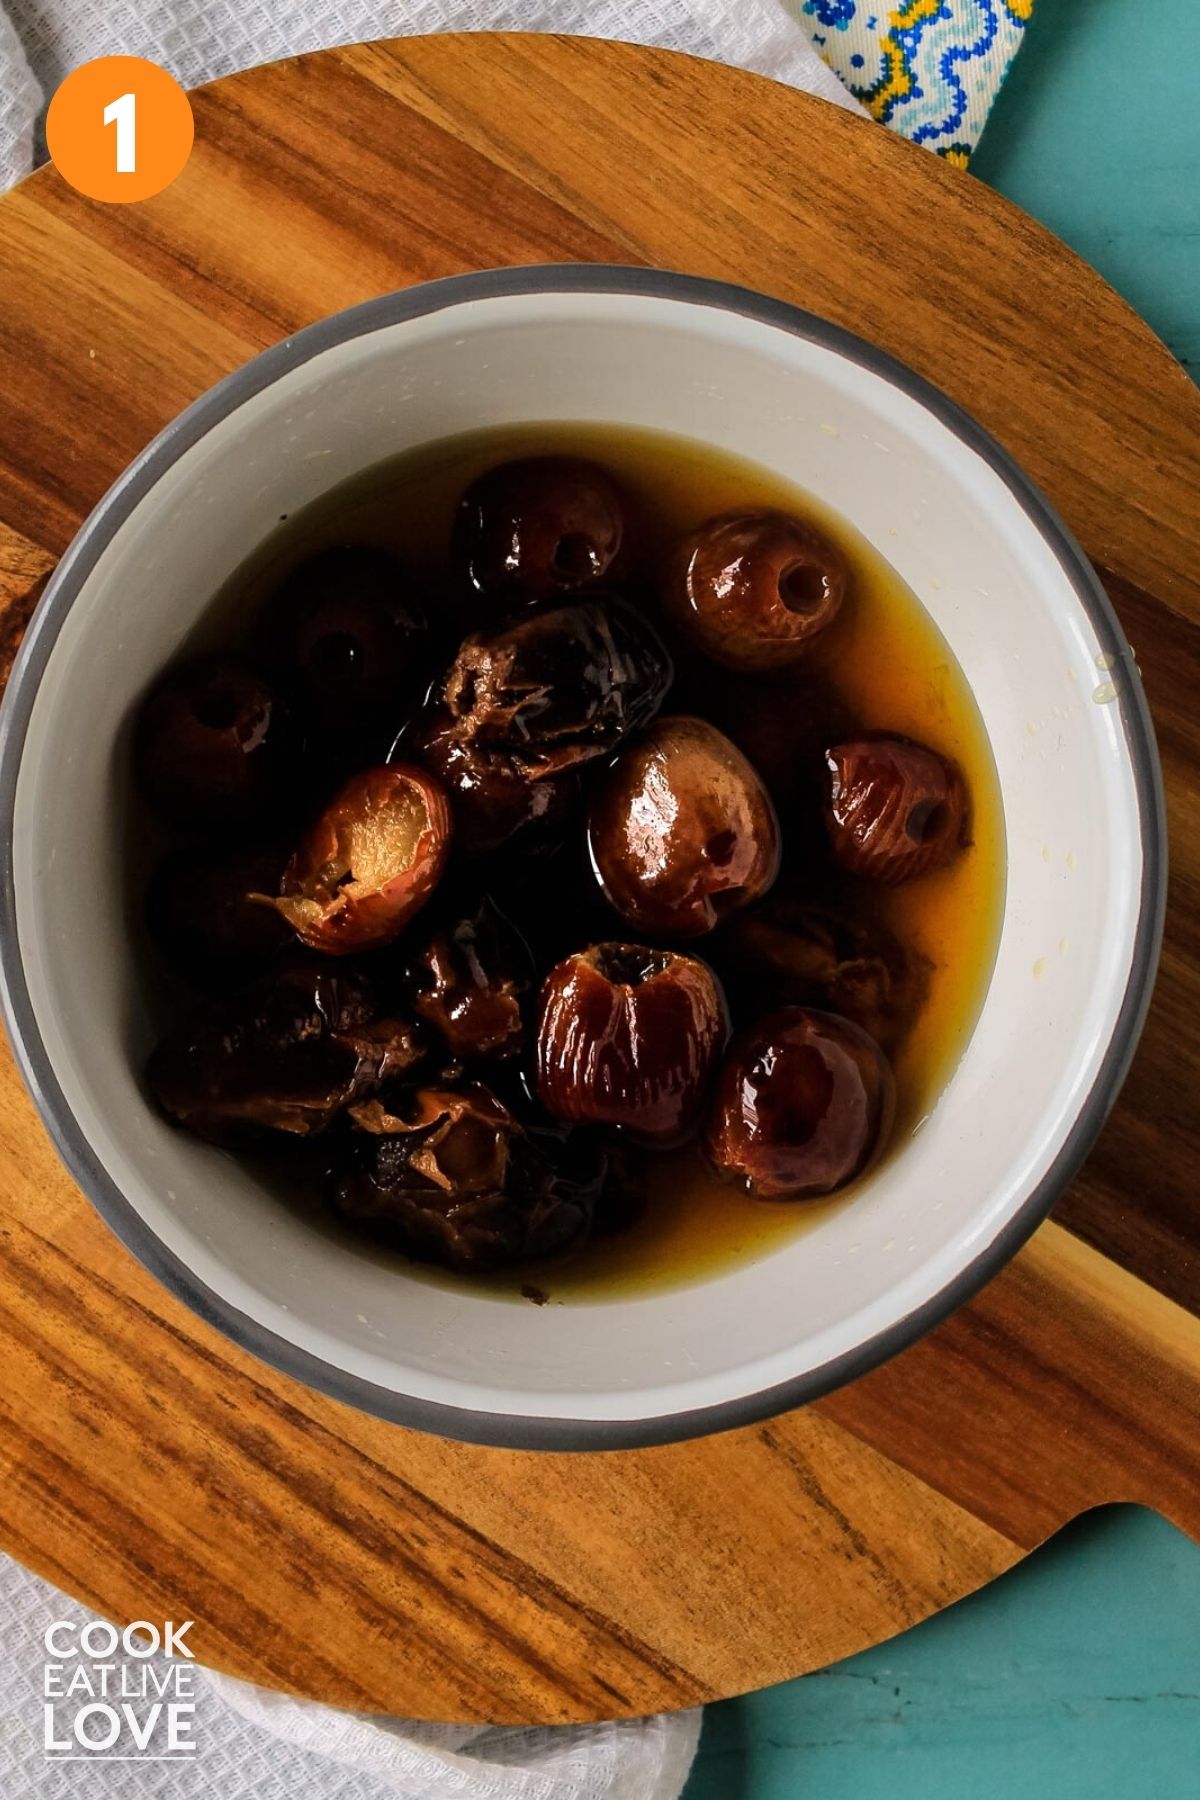 Bowl of dates in water on table.